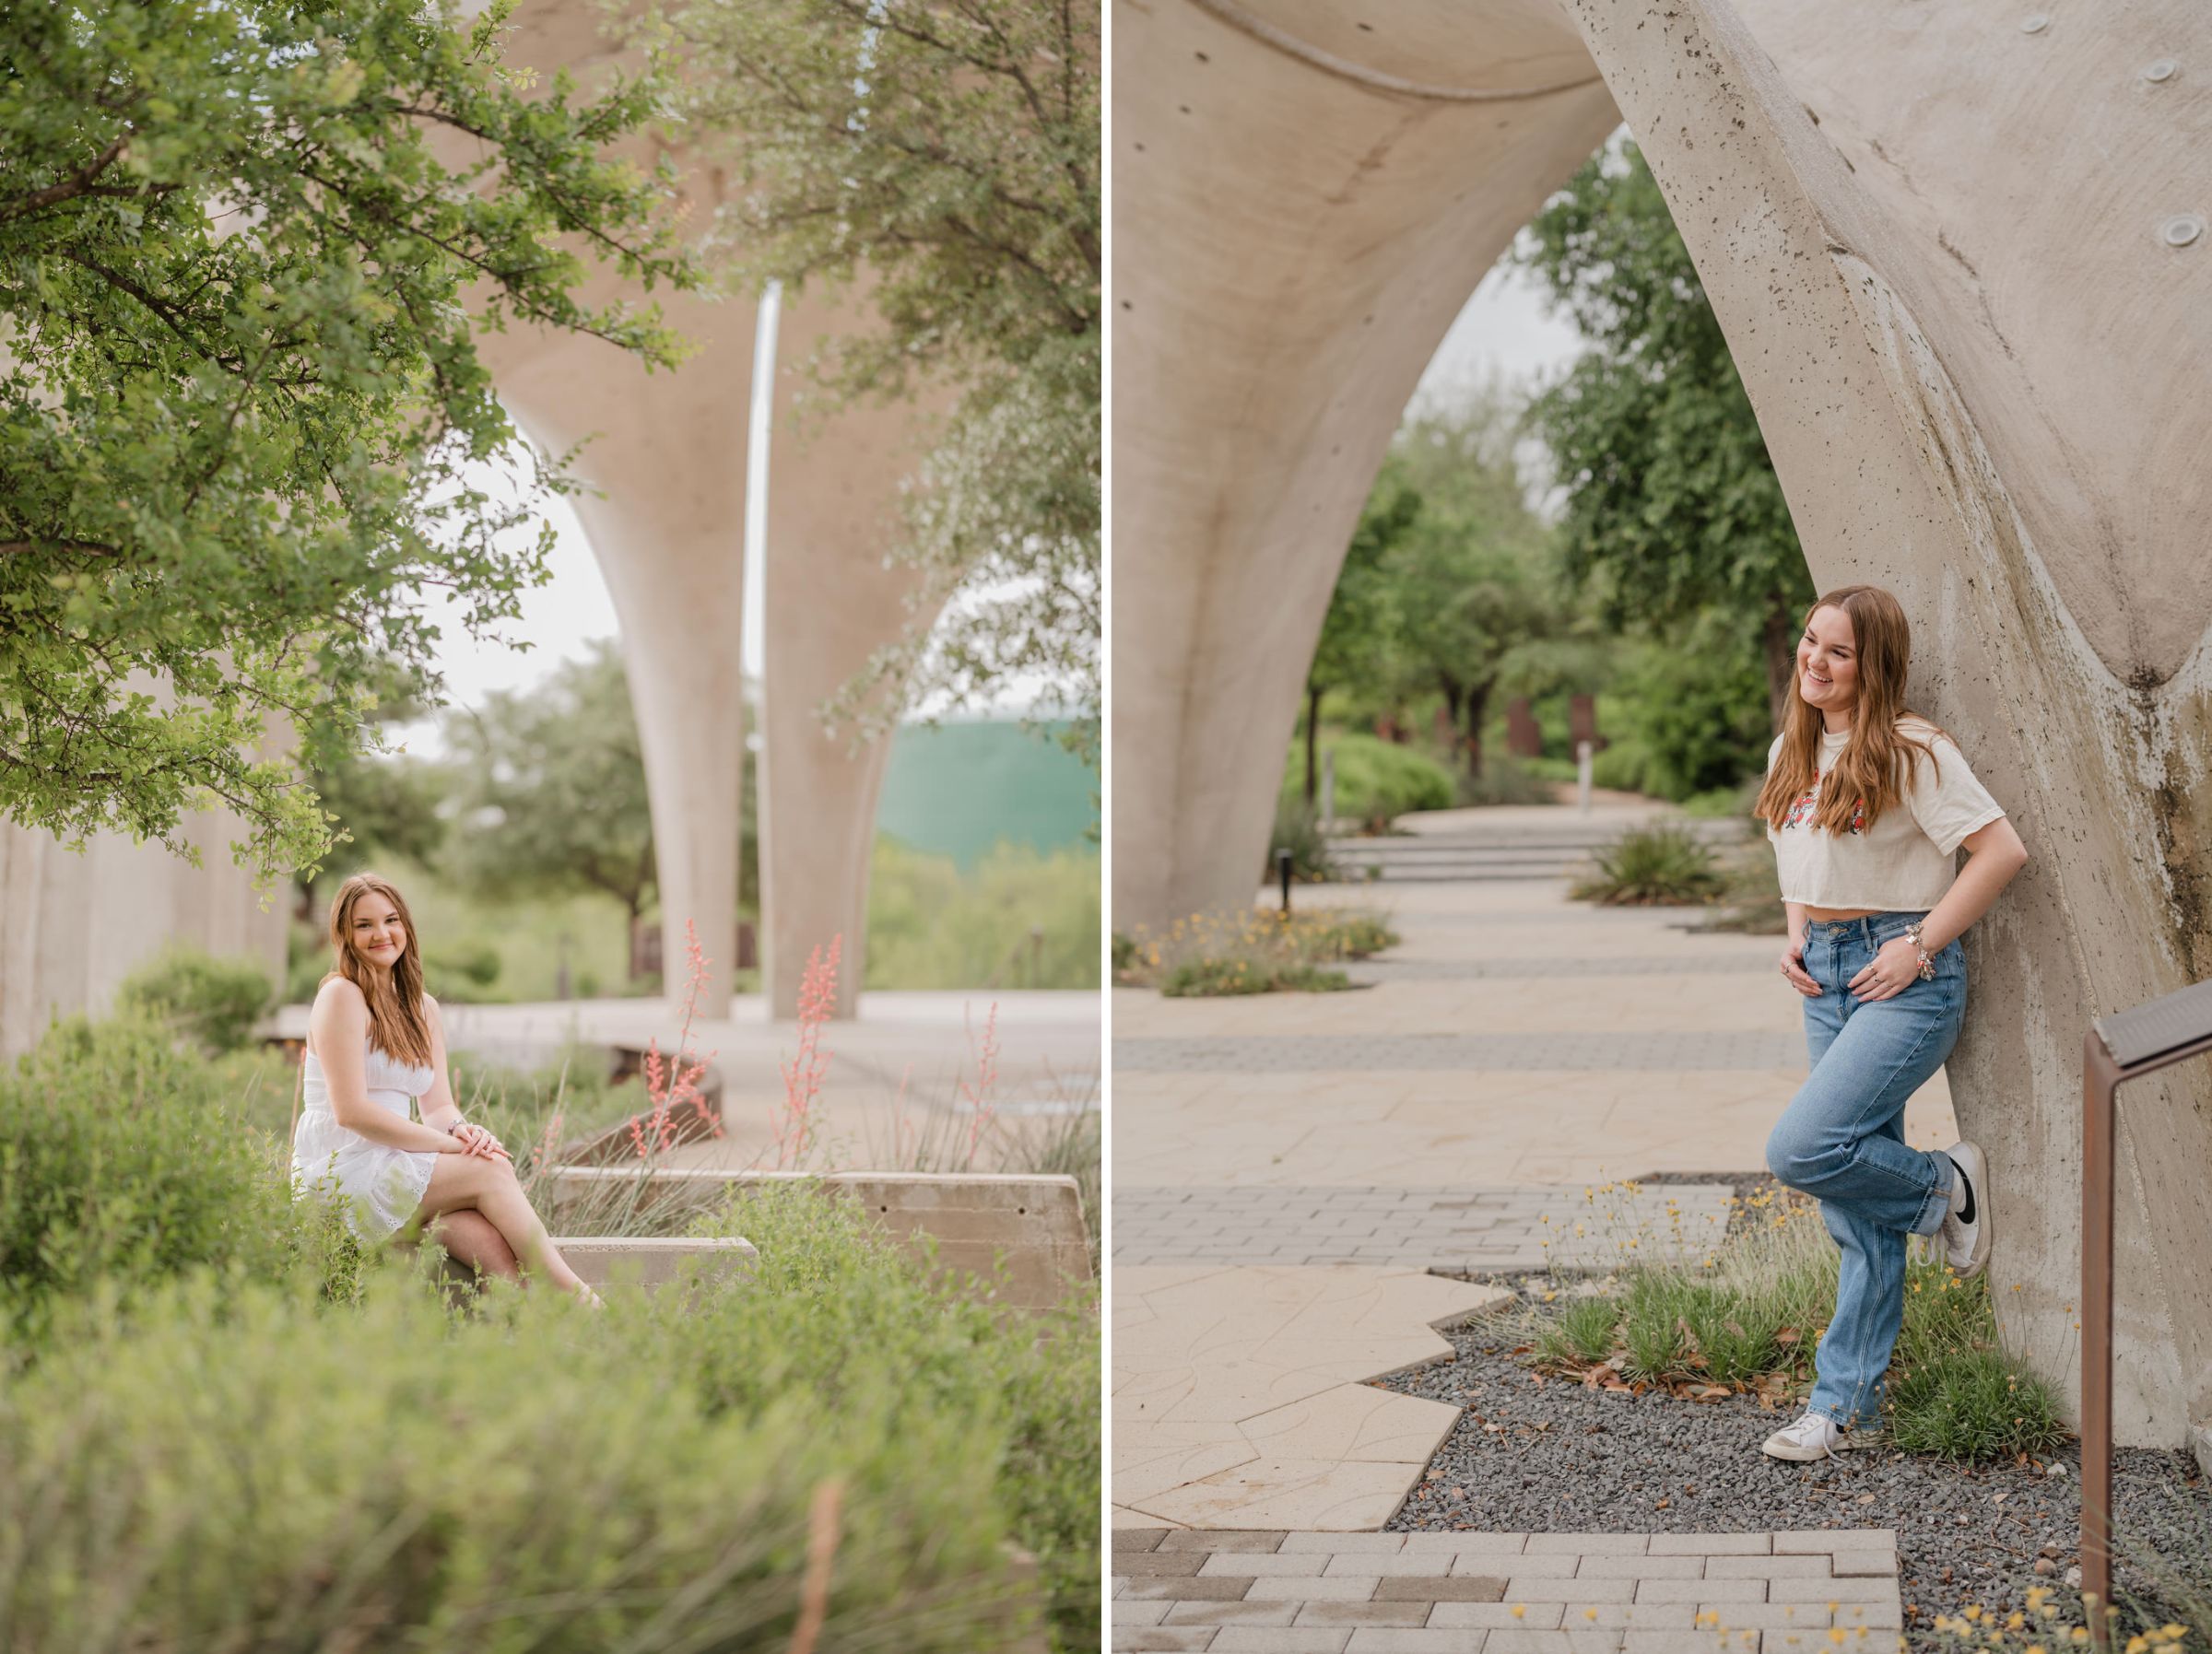 Side-by-side images of a girl at Confluence Park. The petals are in the background of both images.